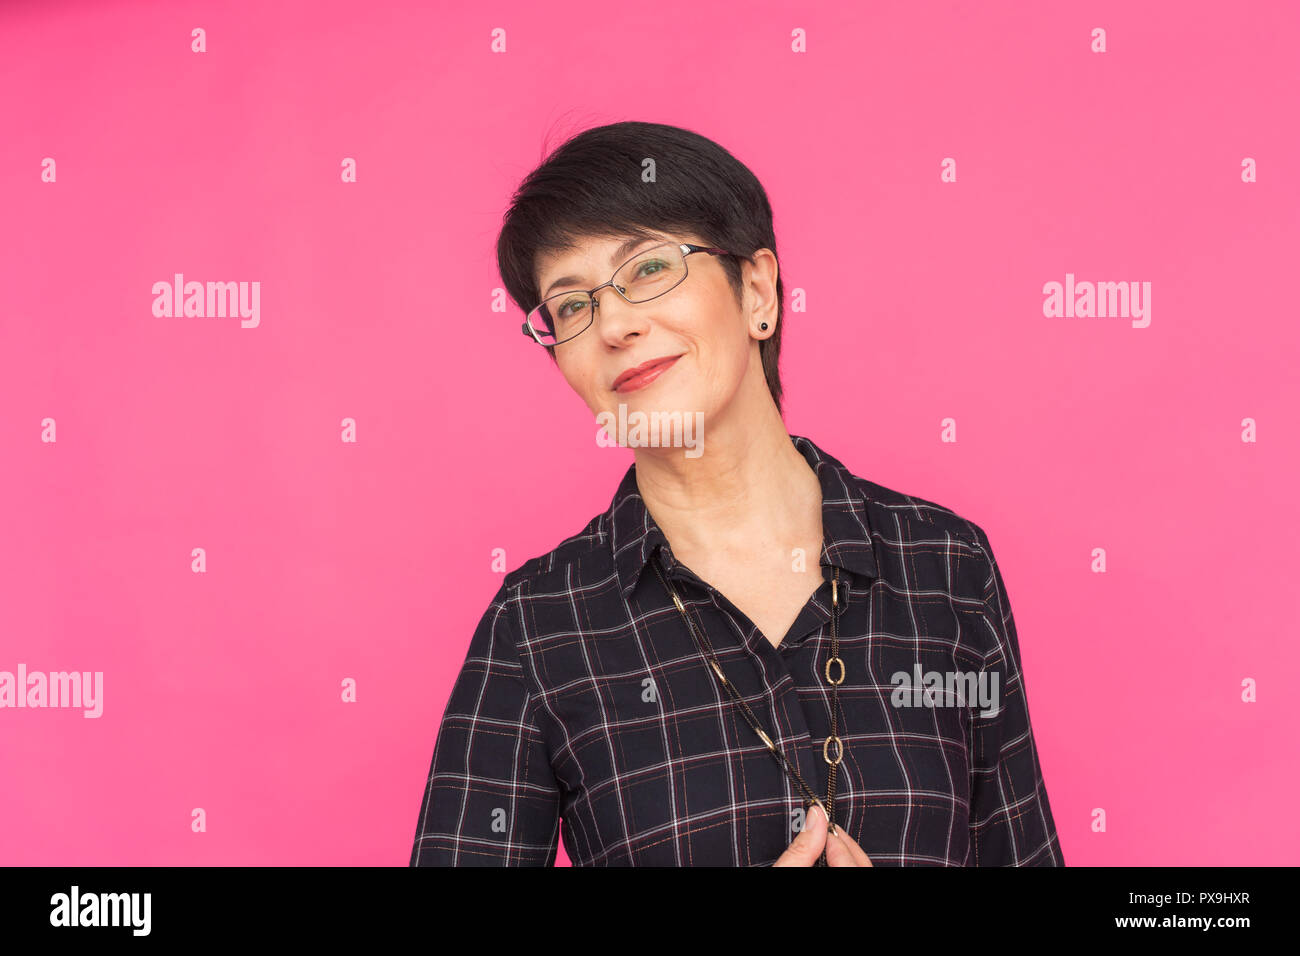 Fashion and people concept - Portrait of middle-aged woman in glasses with  short hair standing on pink background Stock Photo - Alamy